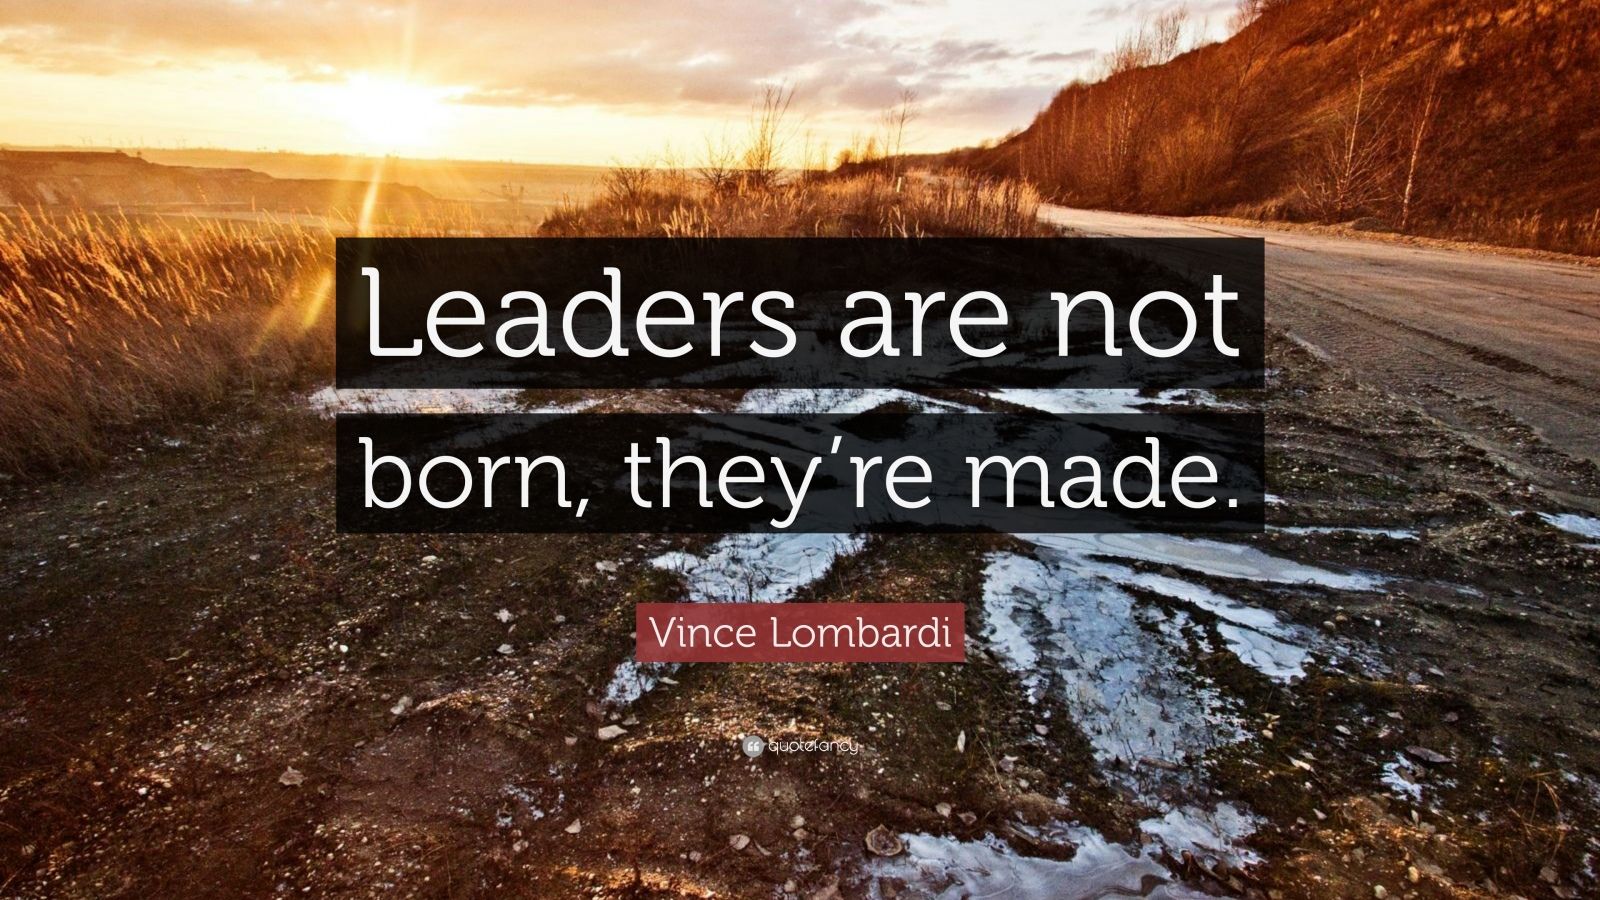 essay on leaders are born not made